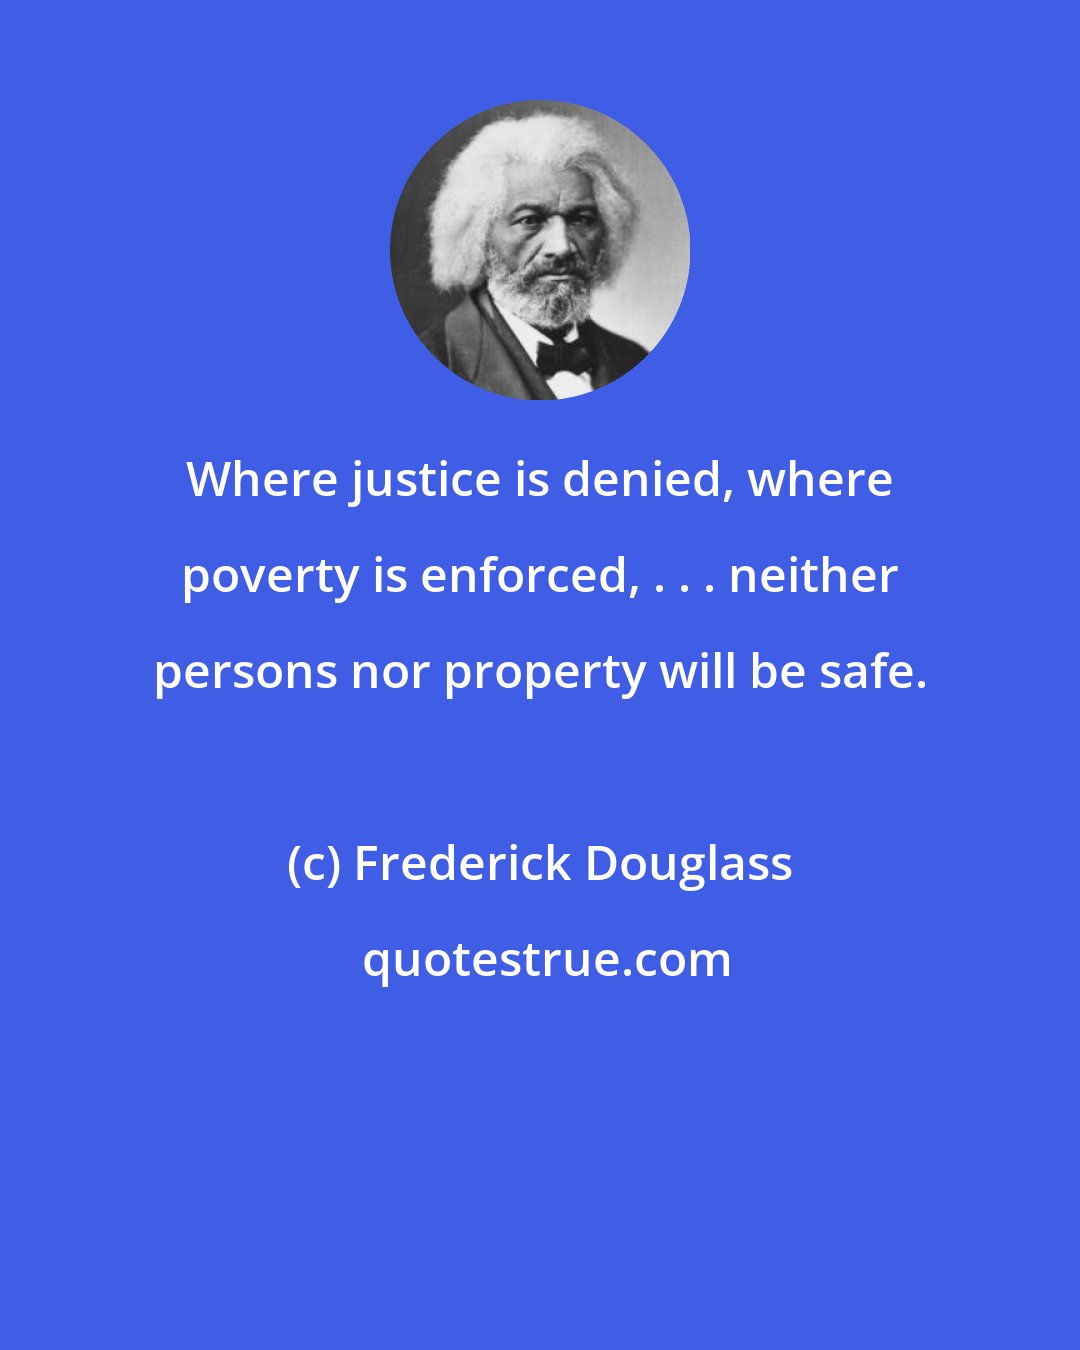 Frederick Douglass: Where justice is denied, where poverty is enforced, . . . neither persons nor property will be safe.